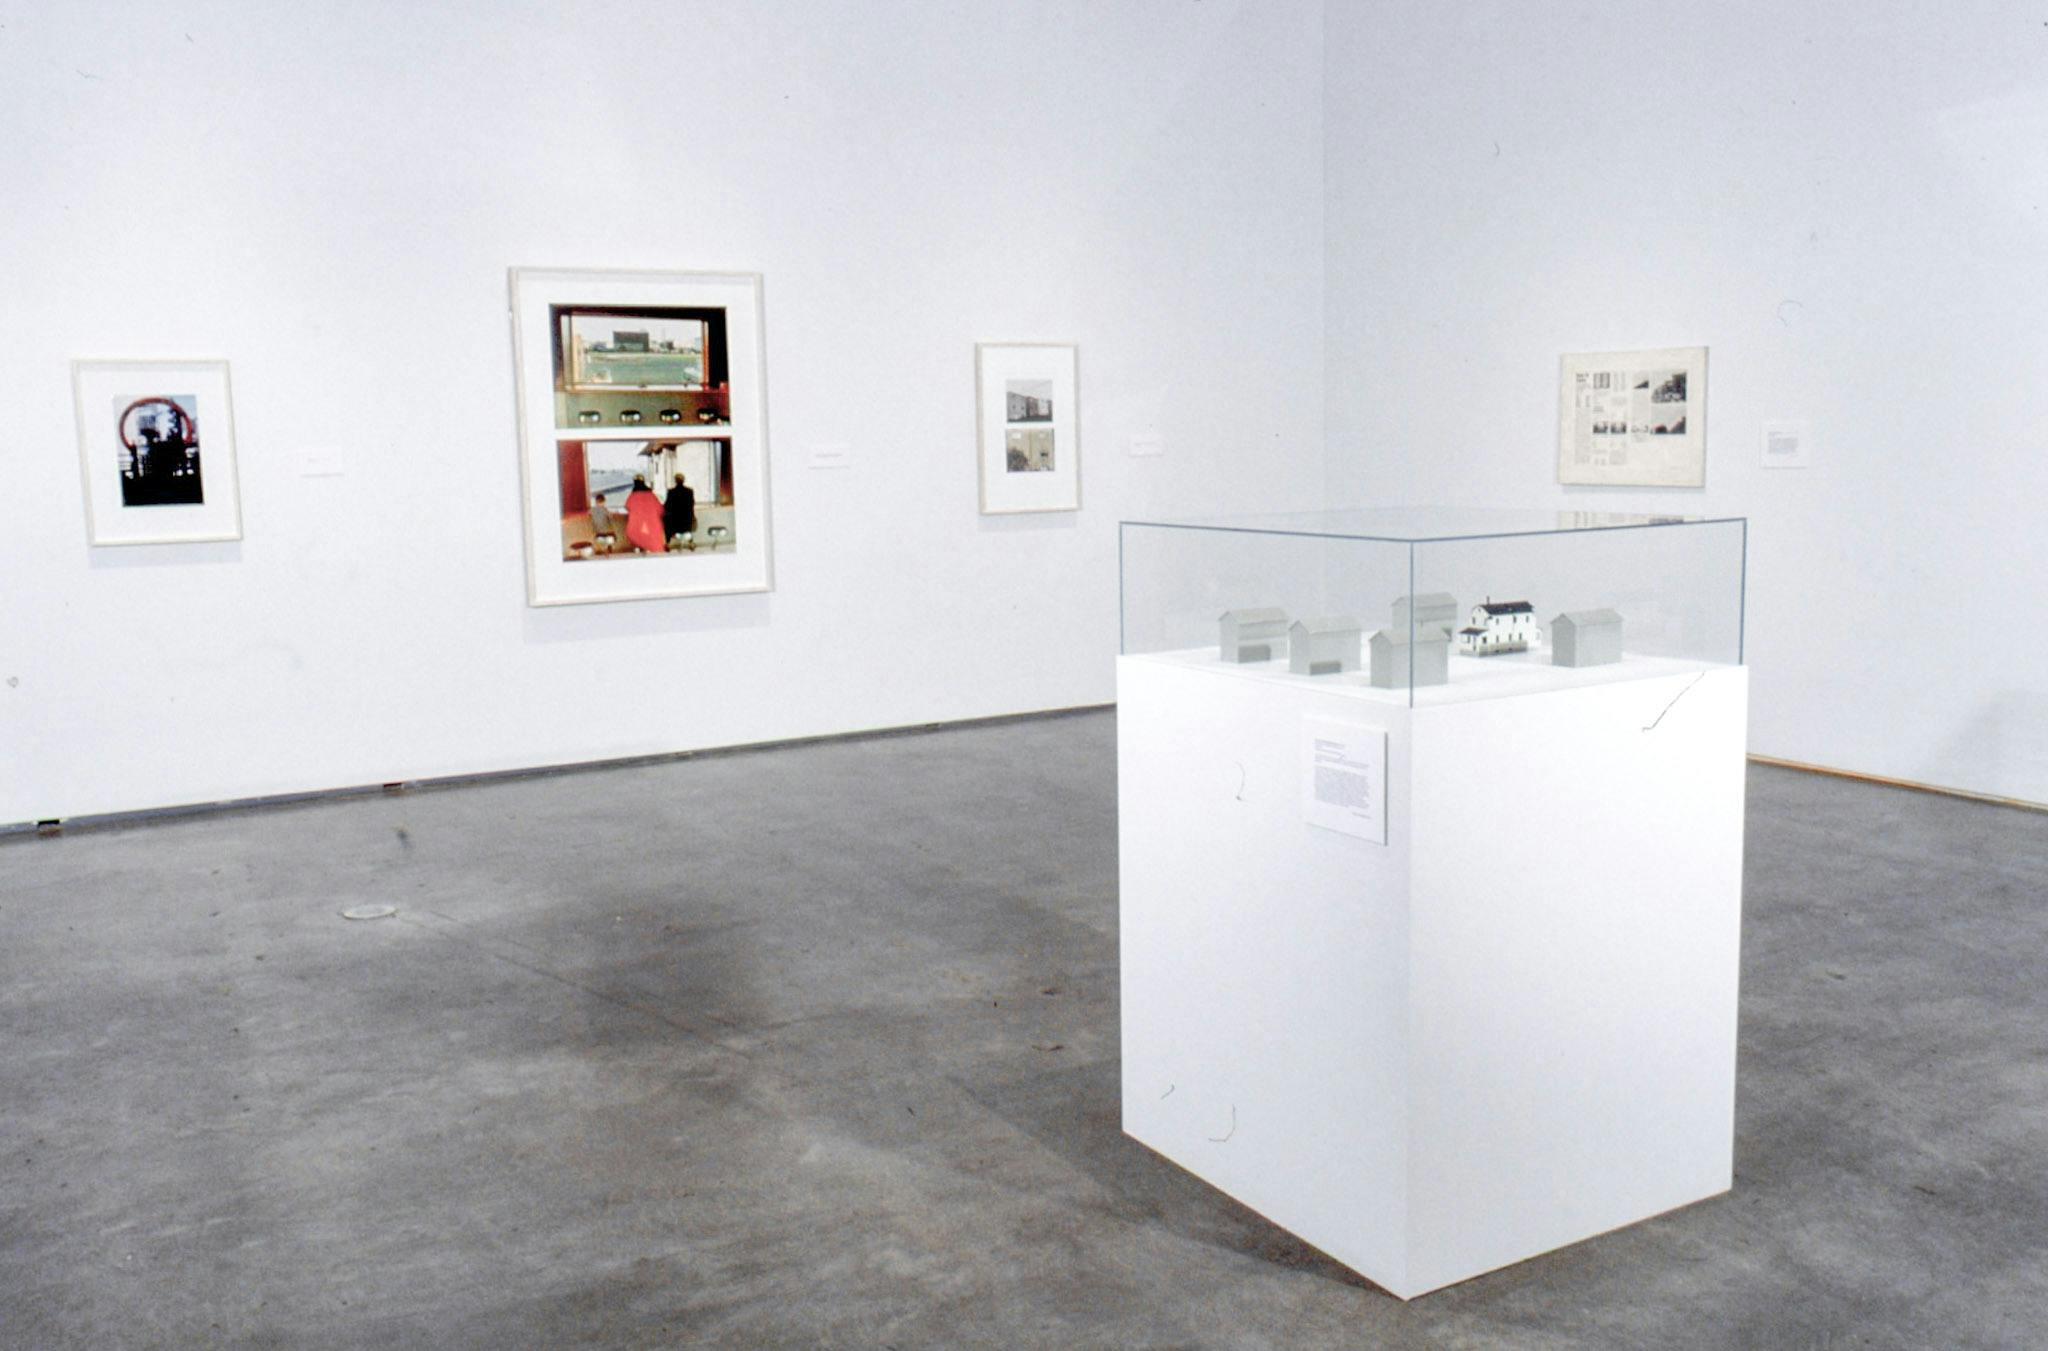 On a large plinth placed in the middle of the gallery, six square-shaped sculptures sit. Four framed two-dimensional works are mounted on the walls around this plinth. 